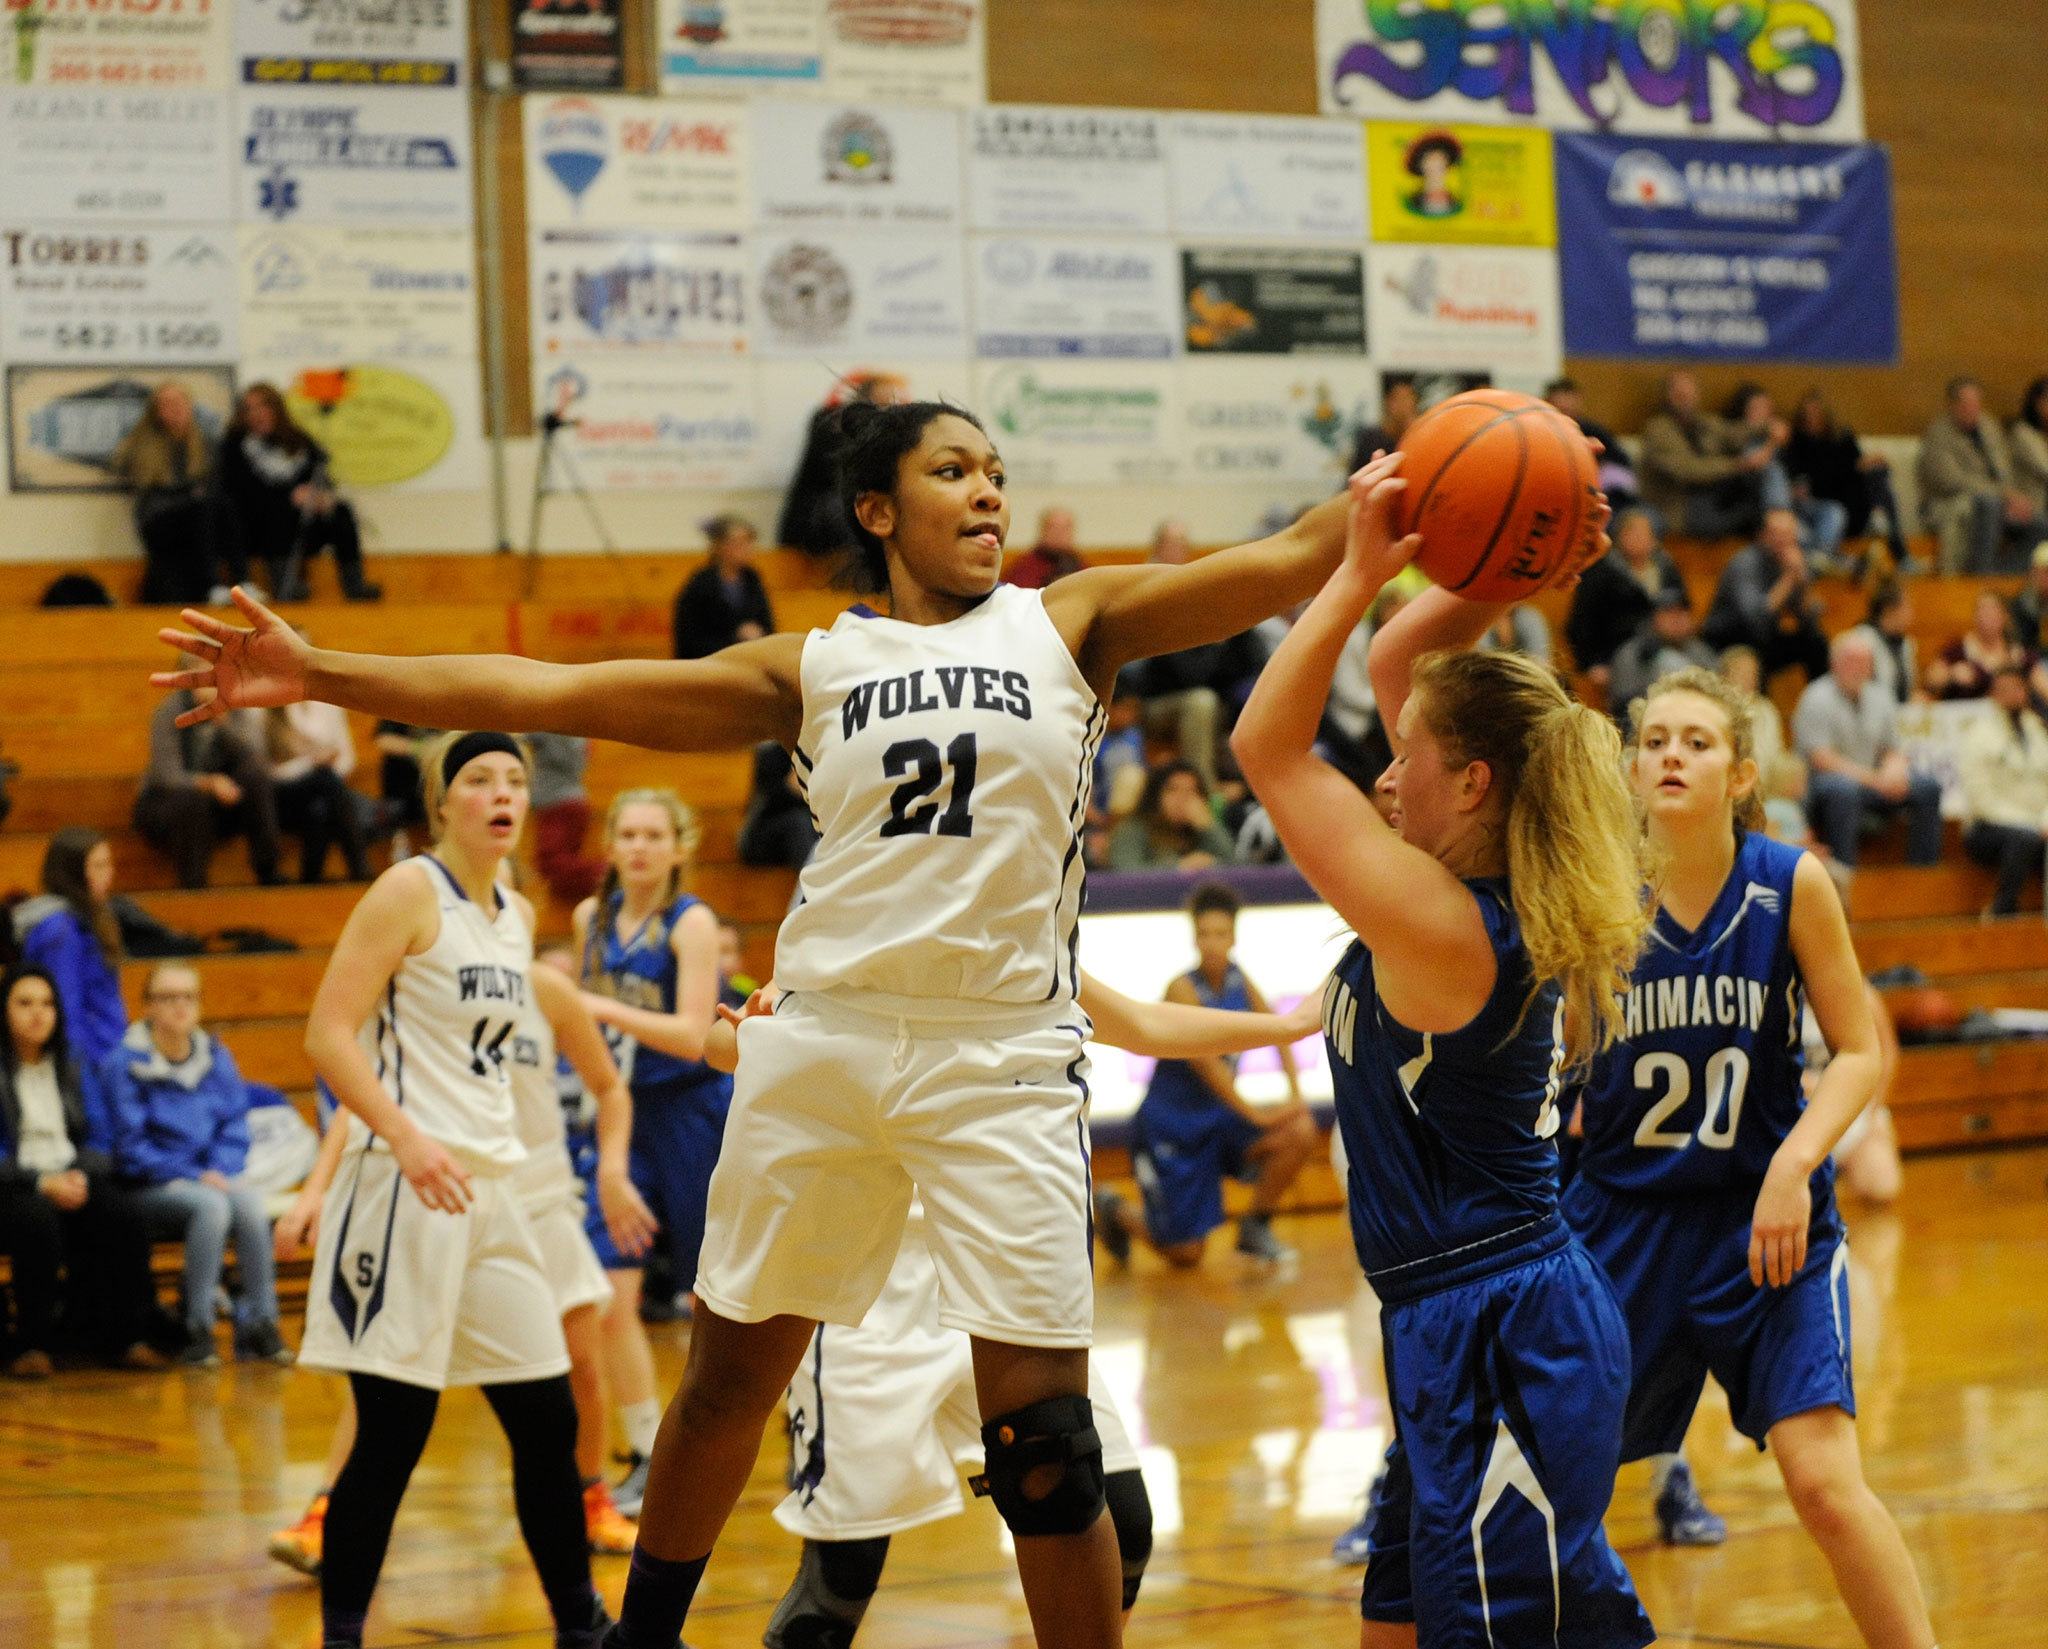 Girls basketball: Wolves open with win, clobber Cowboys